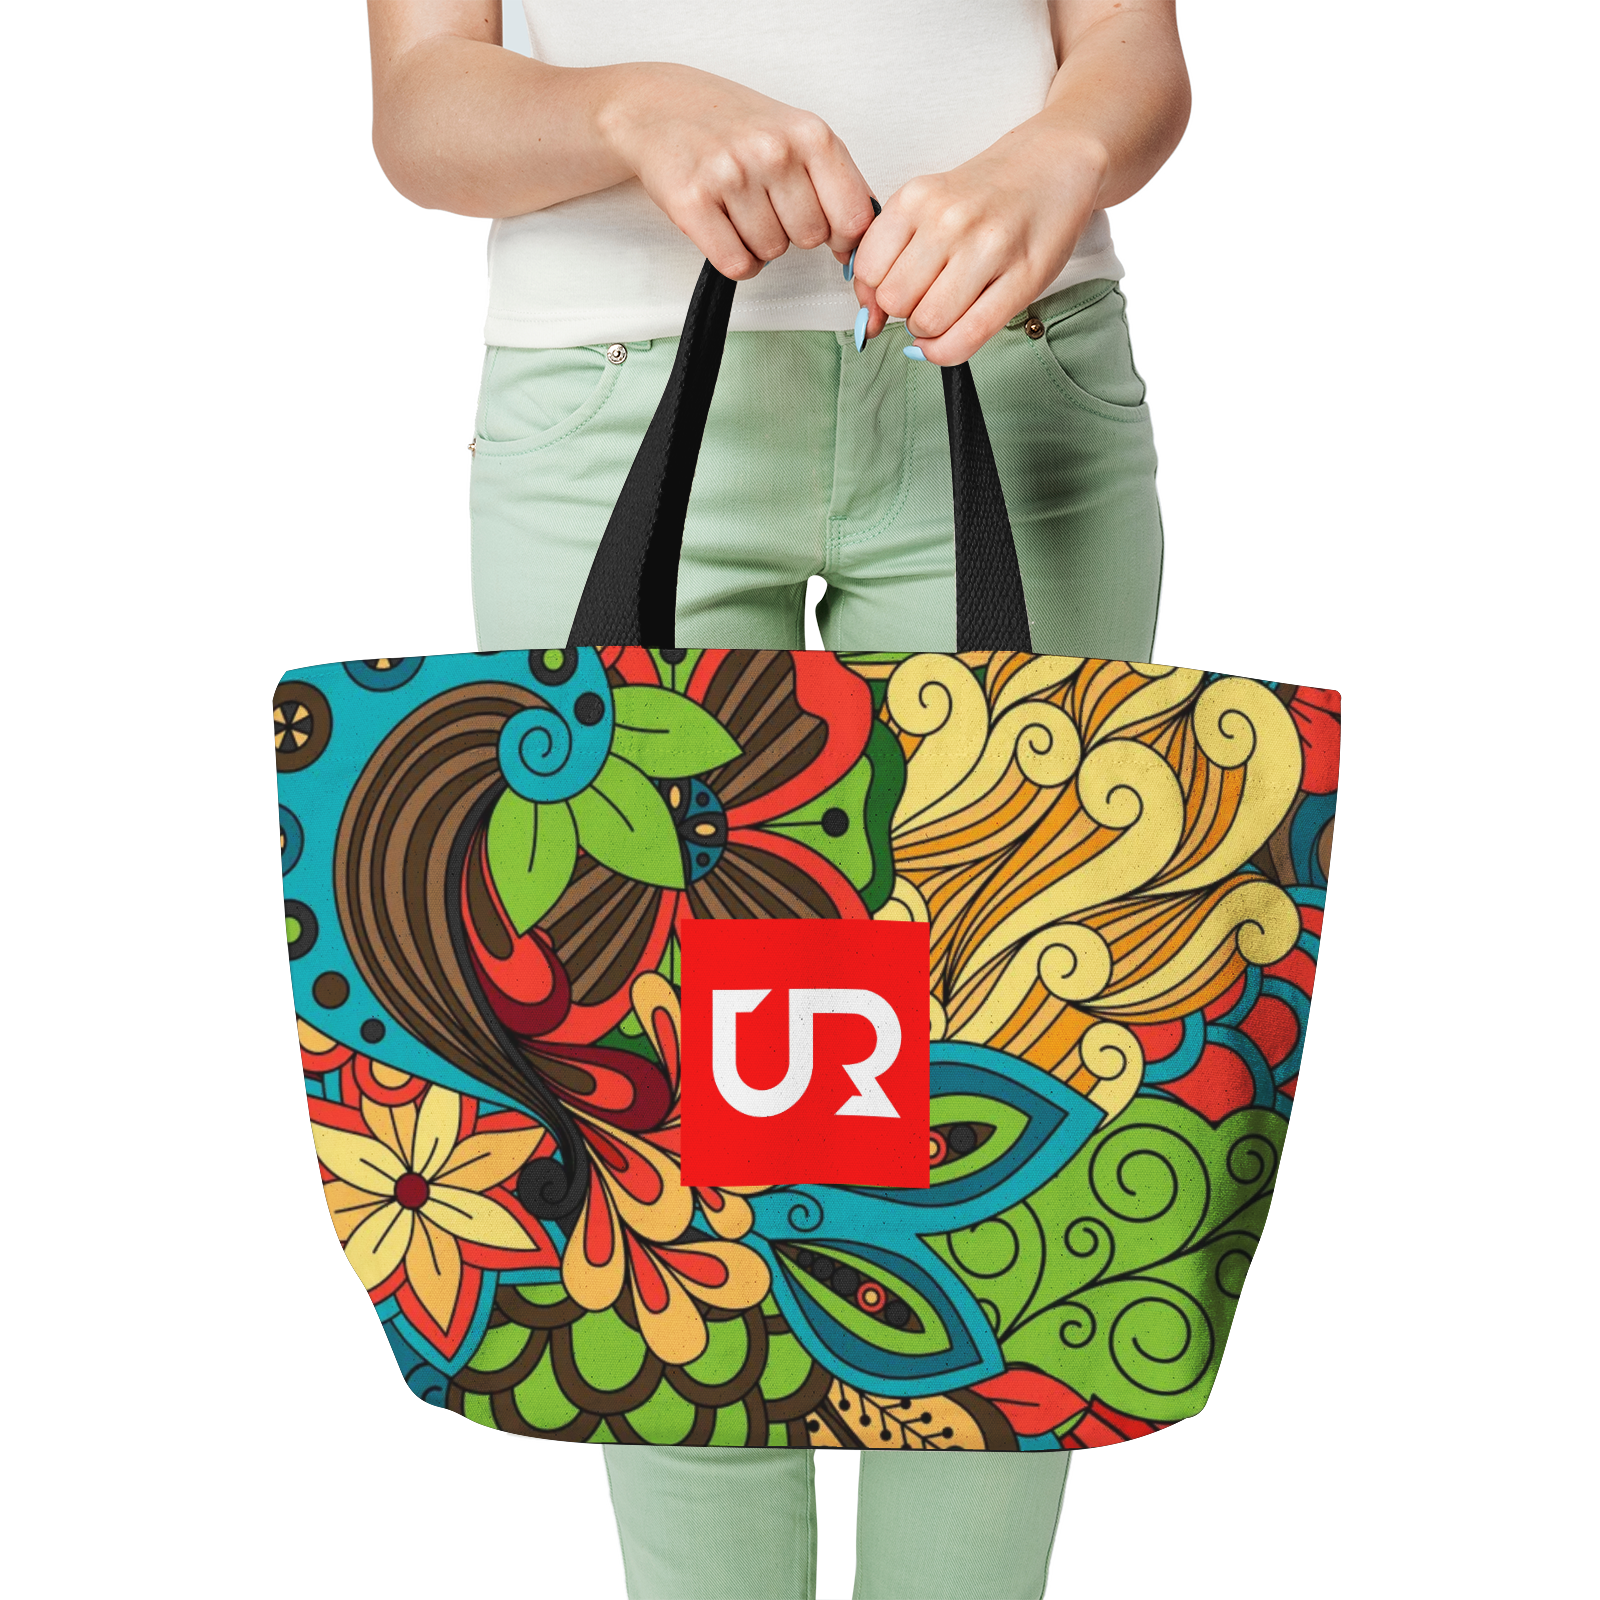 Heavy Duty and Strong Natural Cotton Canvas Tote Bag - UGO ROMANO URTB048